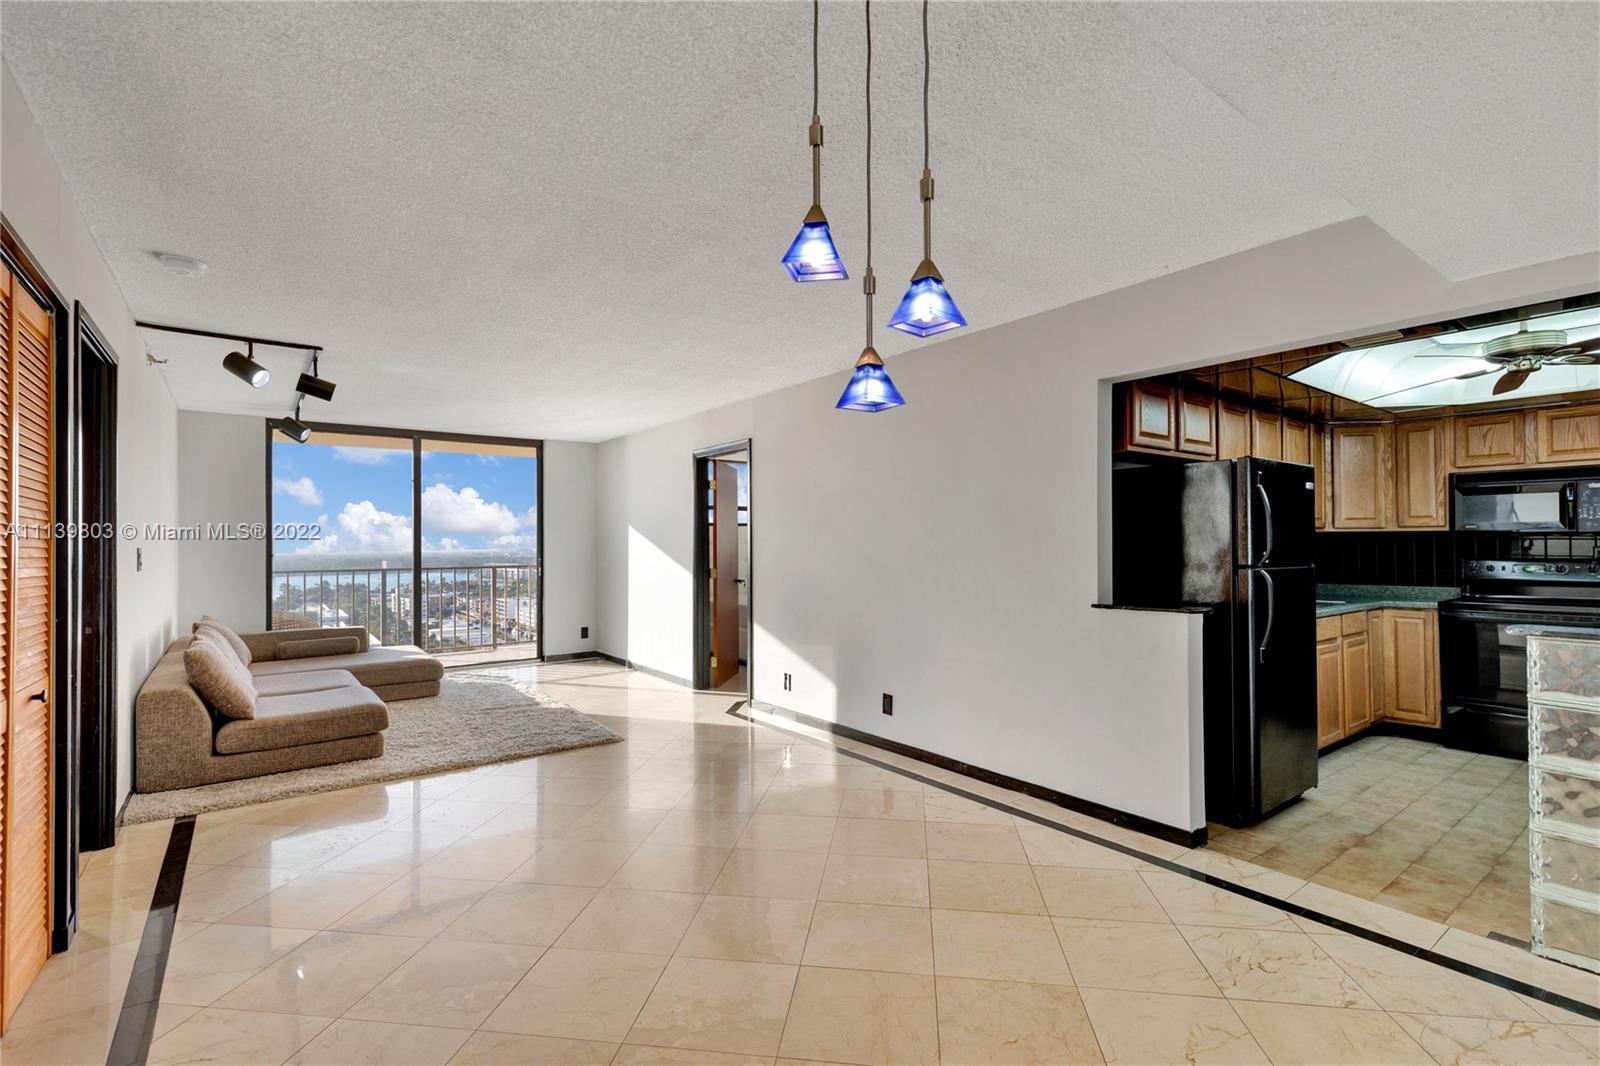 Amazing renovated high floor 2bedroom/2 bathroom with amazing intracoastal views. 1 parking space as